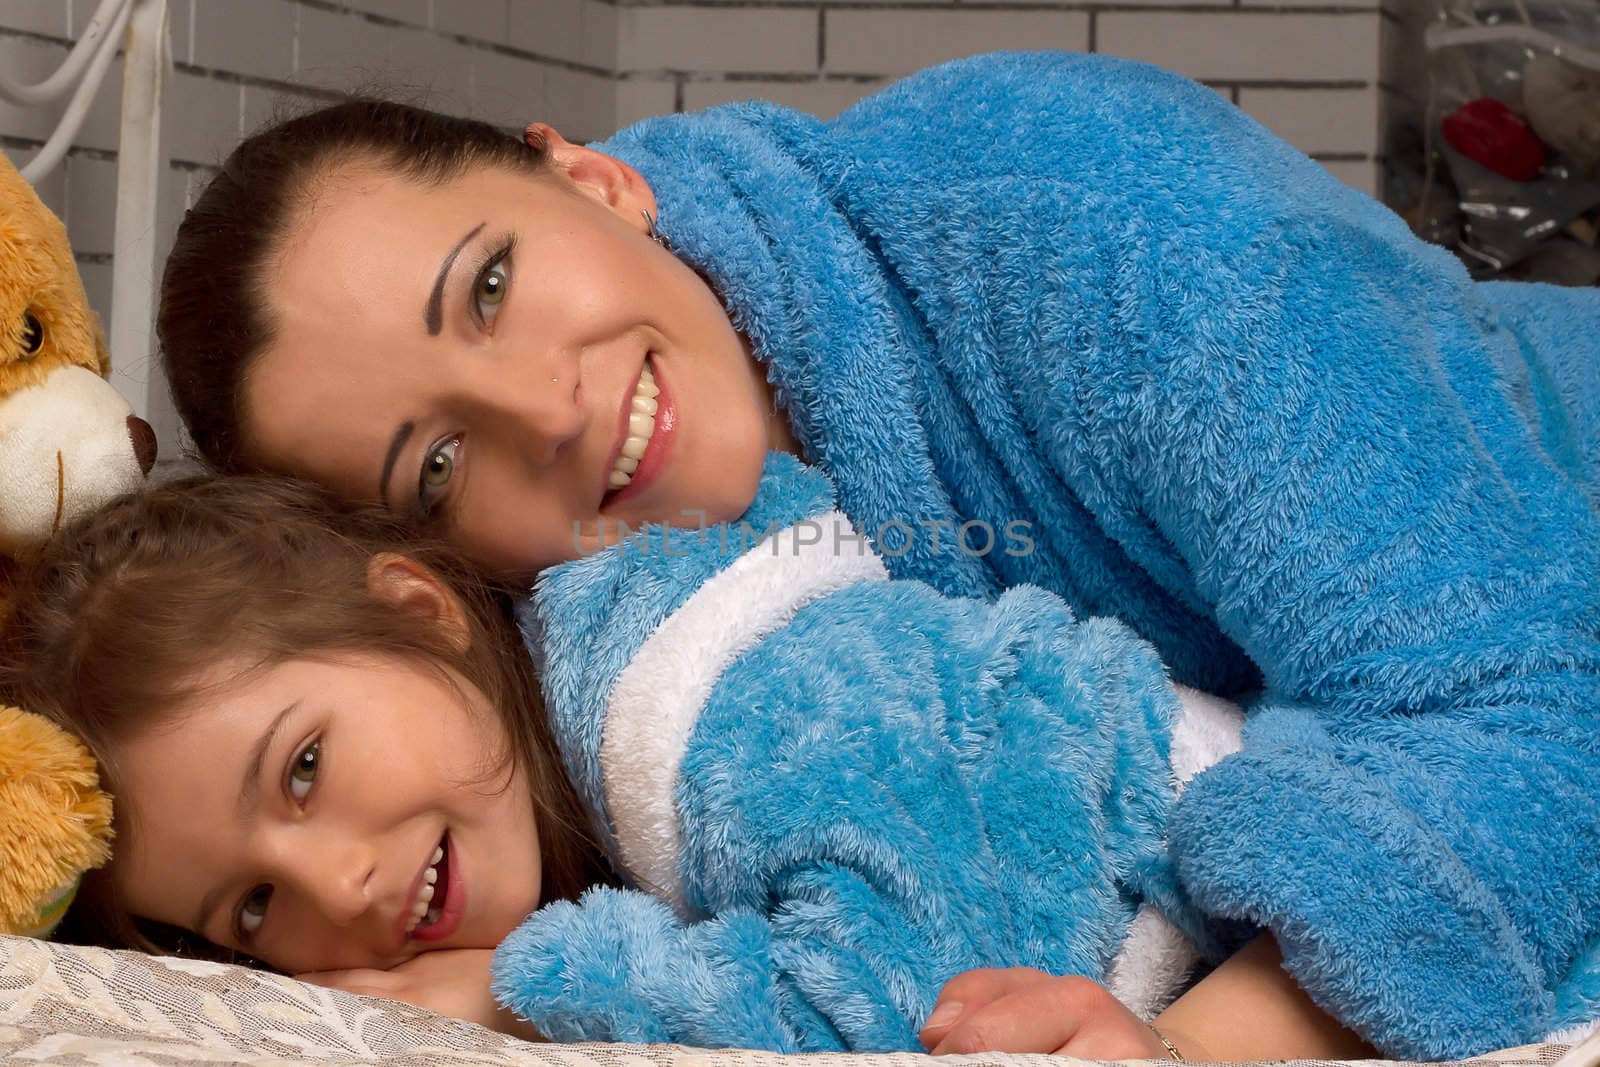 Mom and daughter in the same blue terry robe by victosha